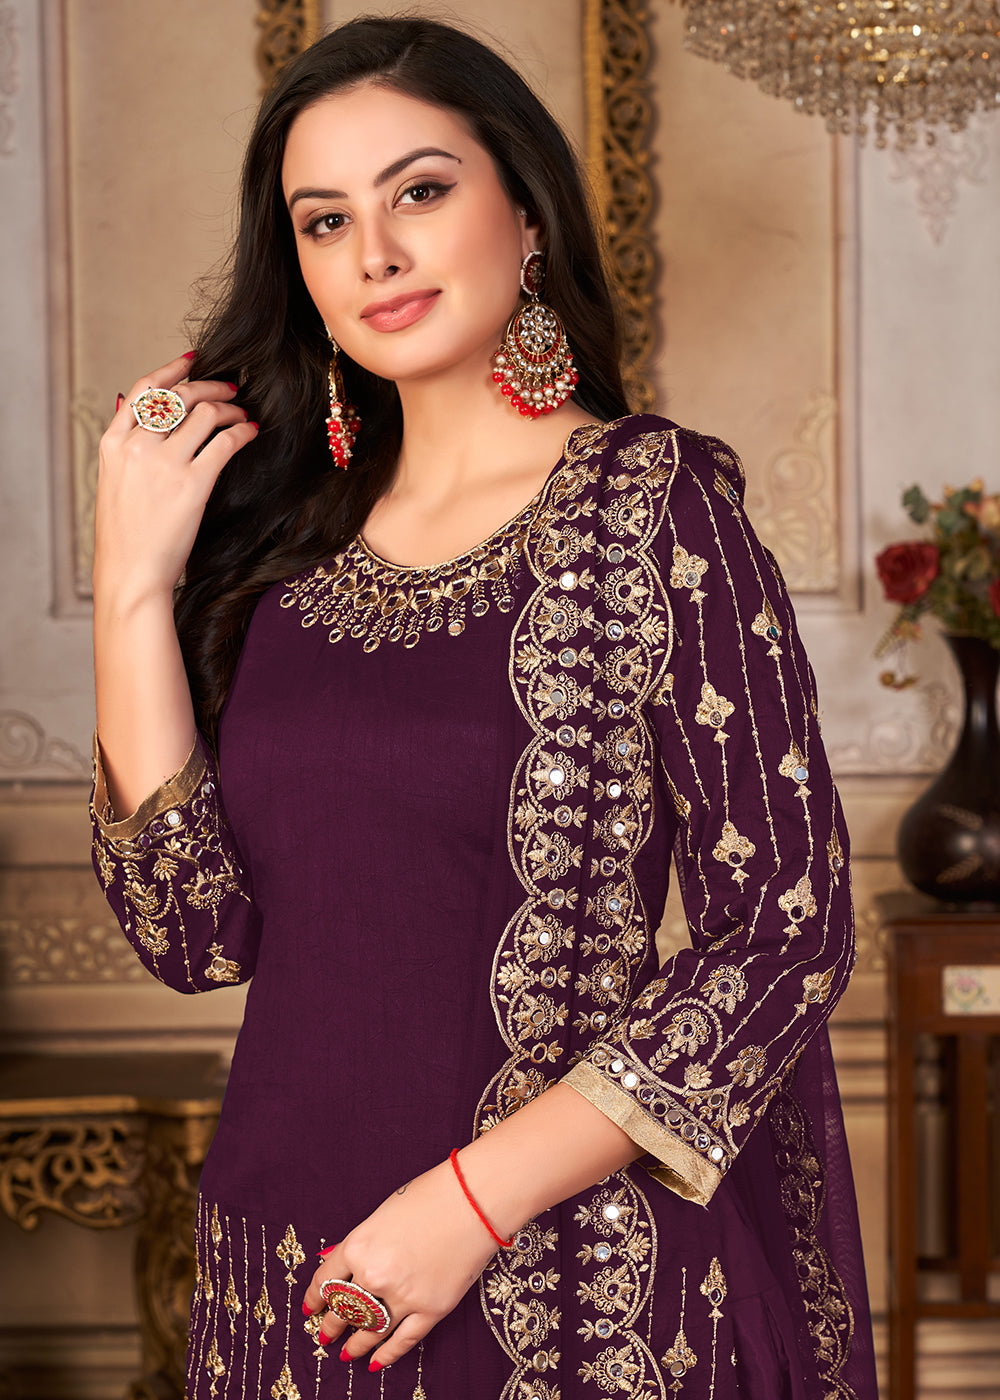 Buy Now Purple Patiala Style Silk Crafted Punjabi Salwar Suit Online in USA, UK, Canada & Worldwide at Empress Clothing.